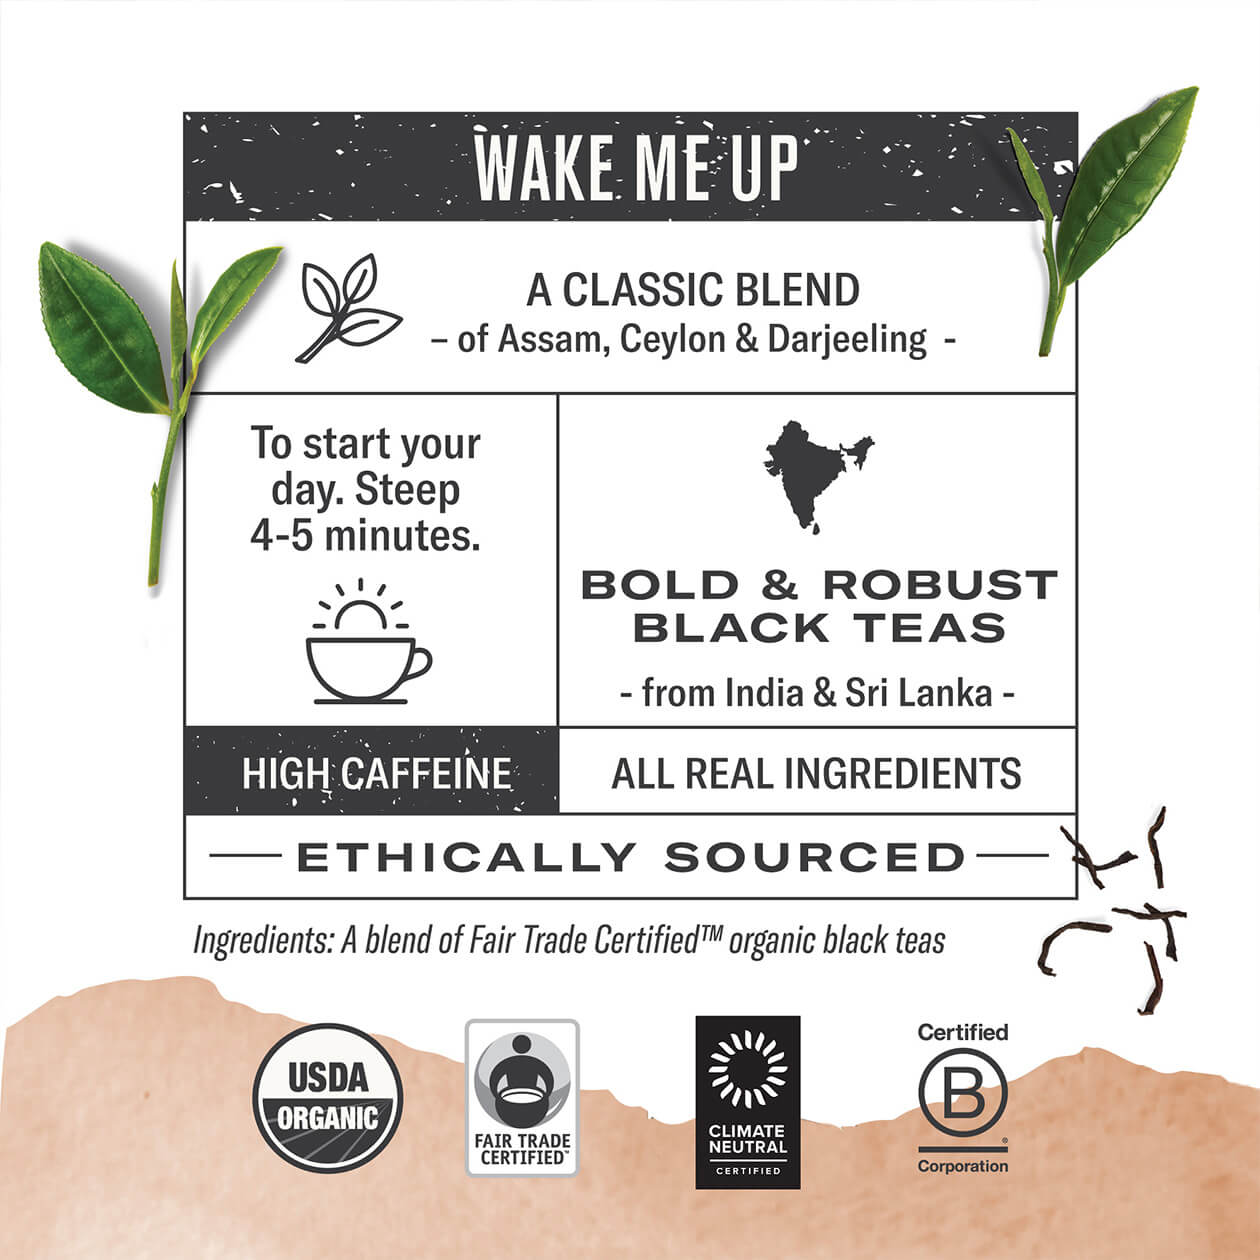 Infographic about Breakfast Blend: steep 4-5 minutes, origin: Assam India, high caffeine, all real ingredients, ethically sourced